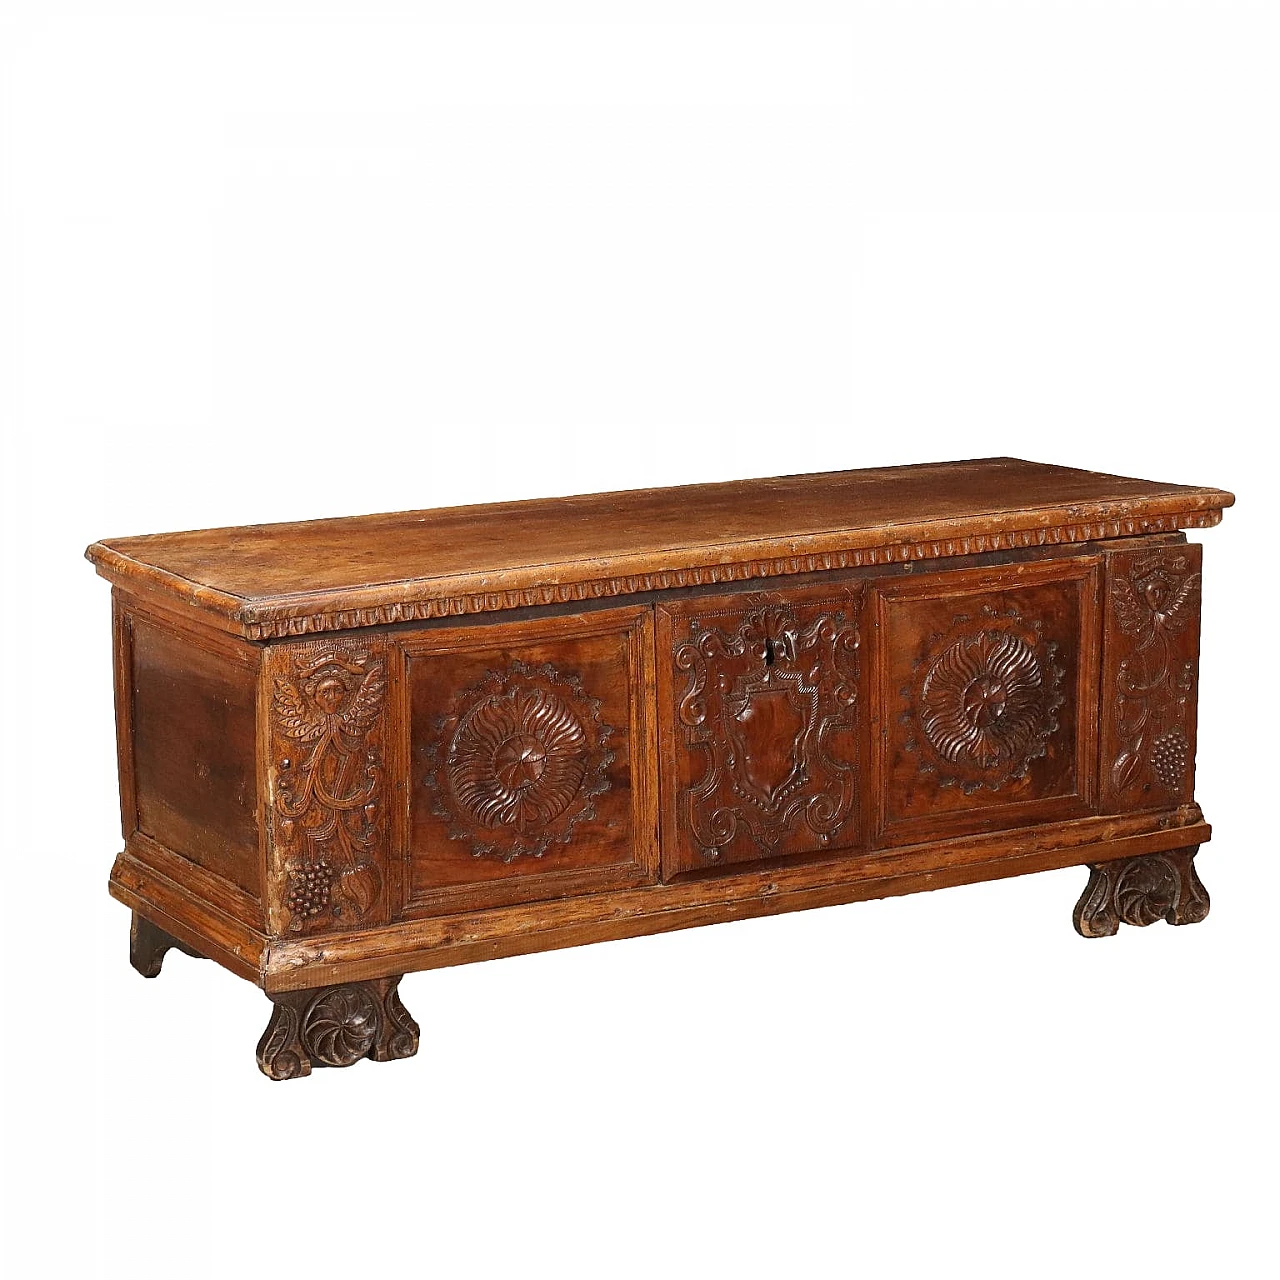 Carved walnut chest with double shelf feet, 18th century 1